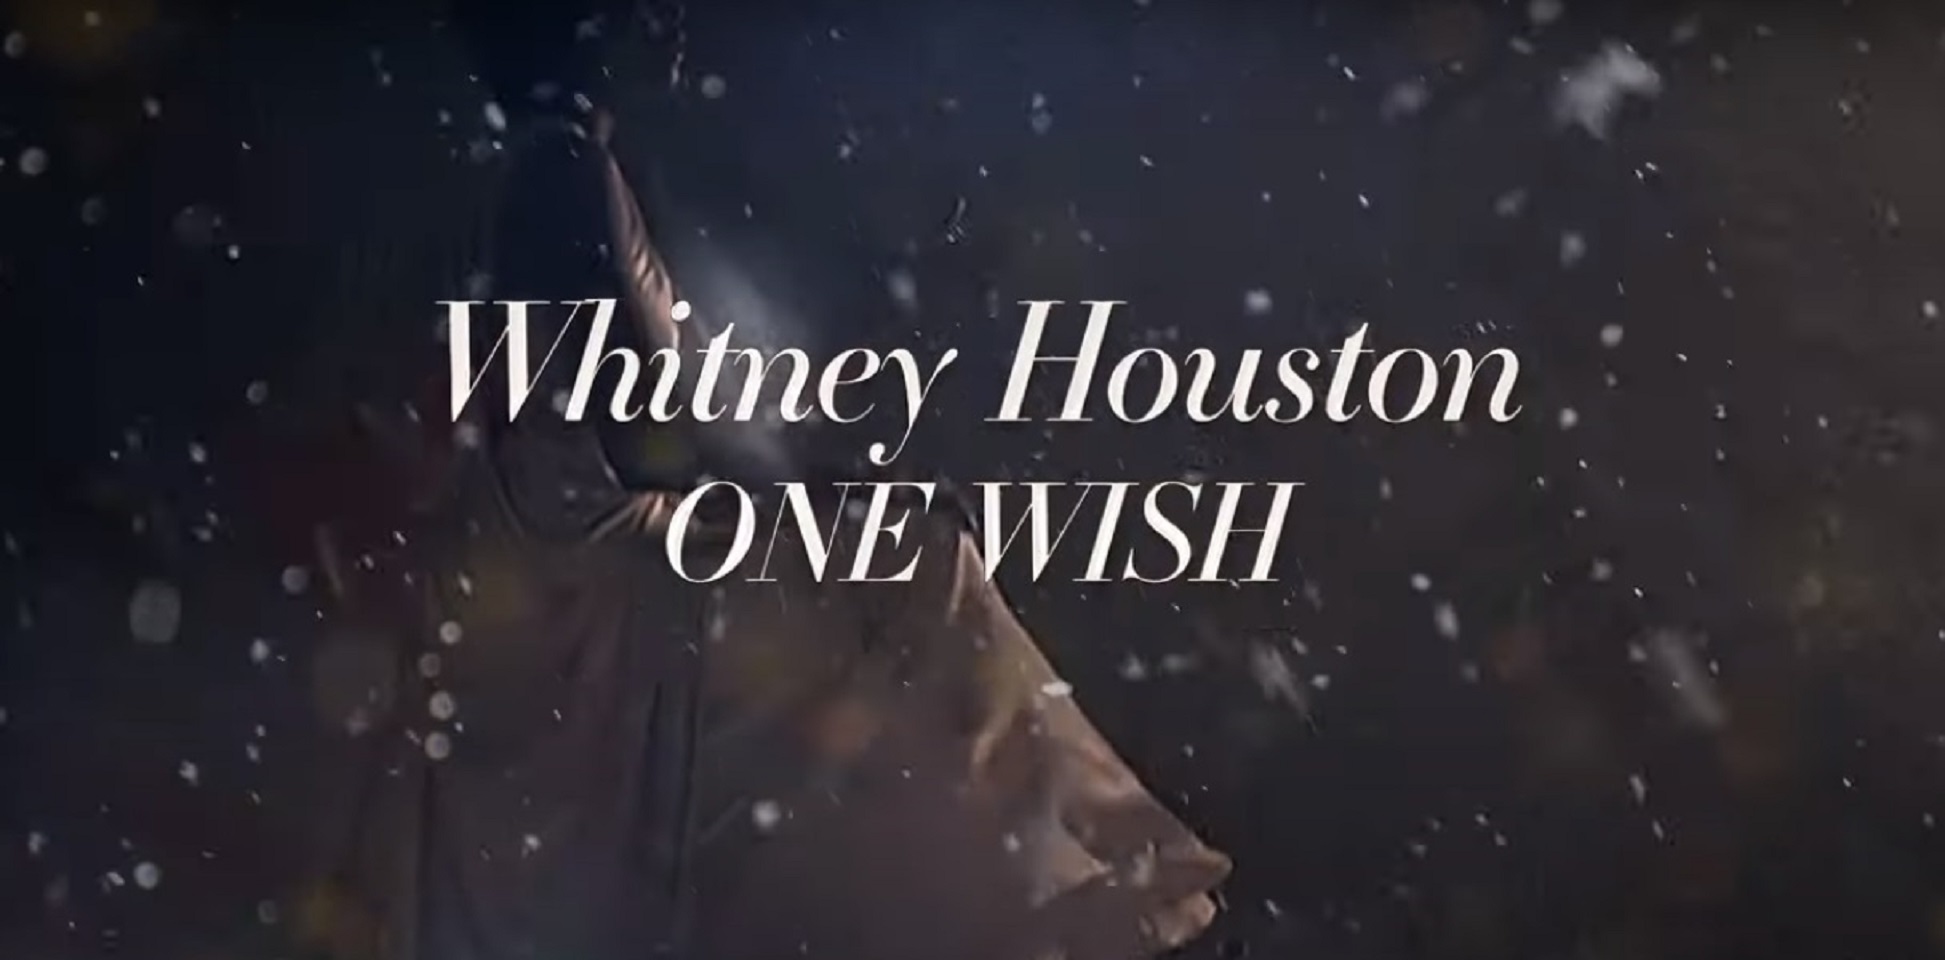 Whitney Houston Estate Releases New Video For Her Song ‘One Wish (For Christmas)’ [Watch]